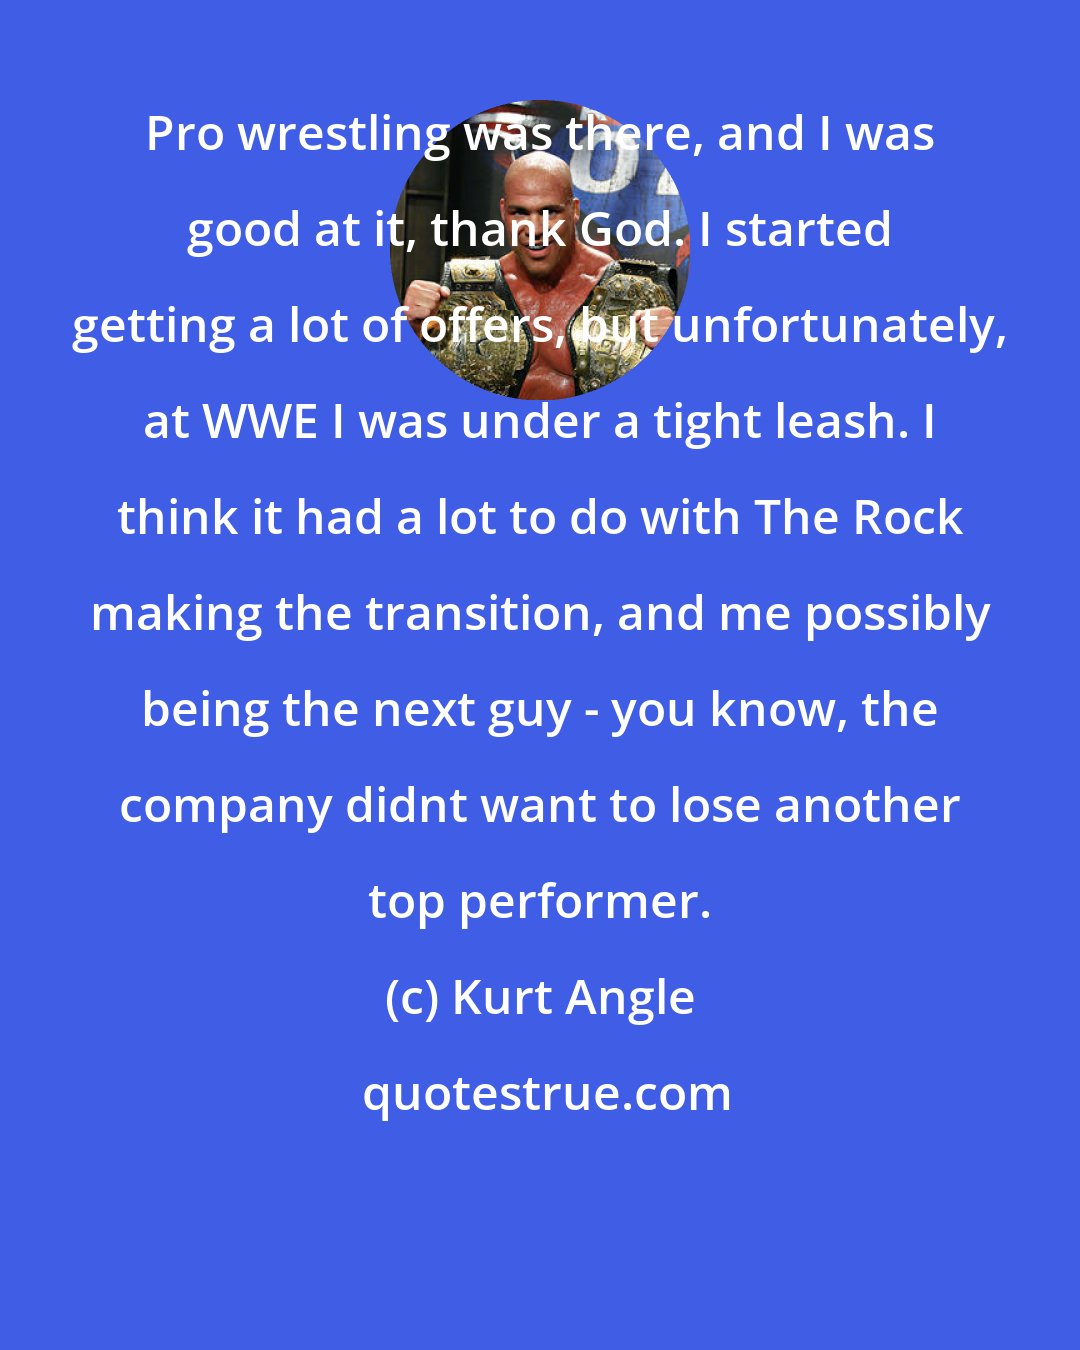 Kurt Angle: Pro wrestling was there, and I was good at it, thank God. I started getting a lot of offers, but unfortunately, at WWE I was under a tight leash. I think it had a lot to do with The Rock making the transition, and me possibly being the next guy - you know, the company didnt want to lose another top performer.